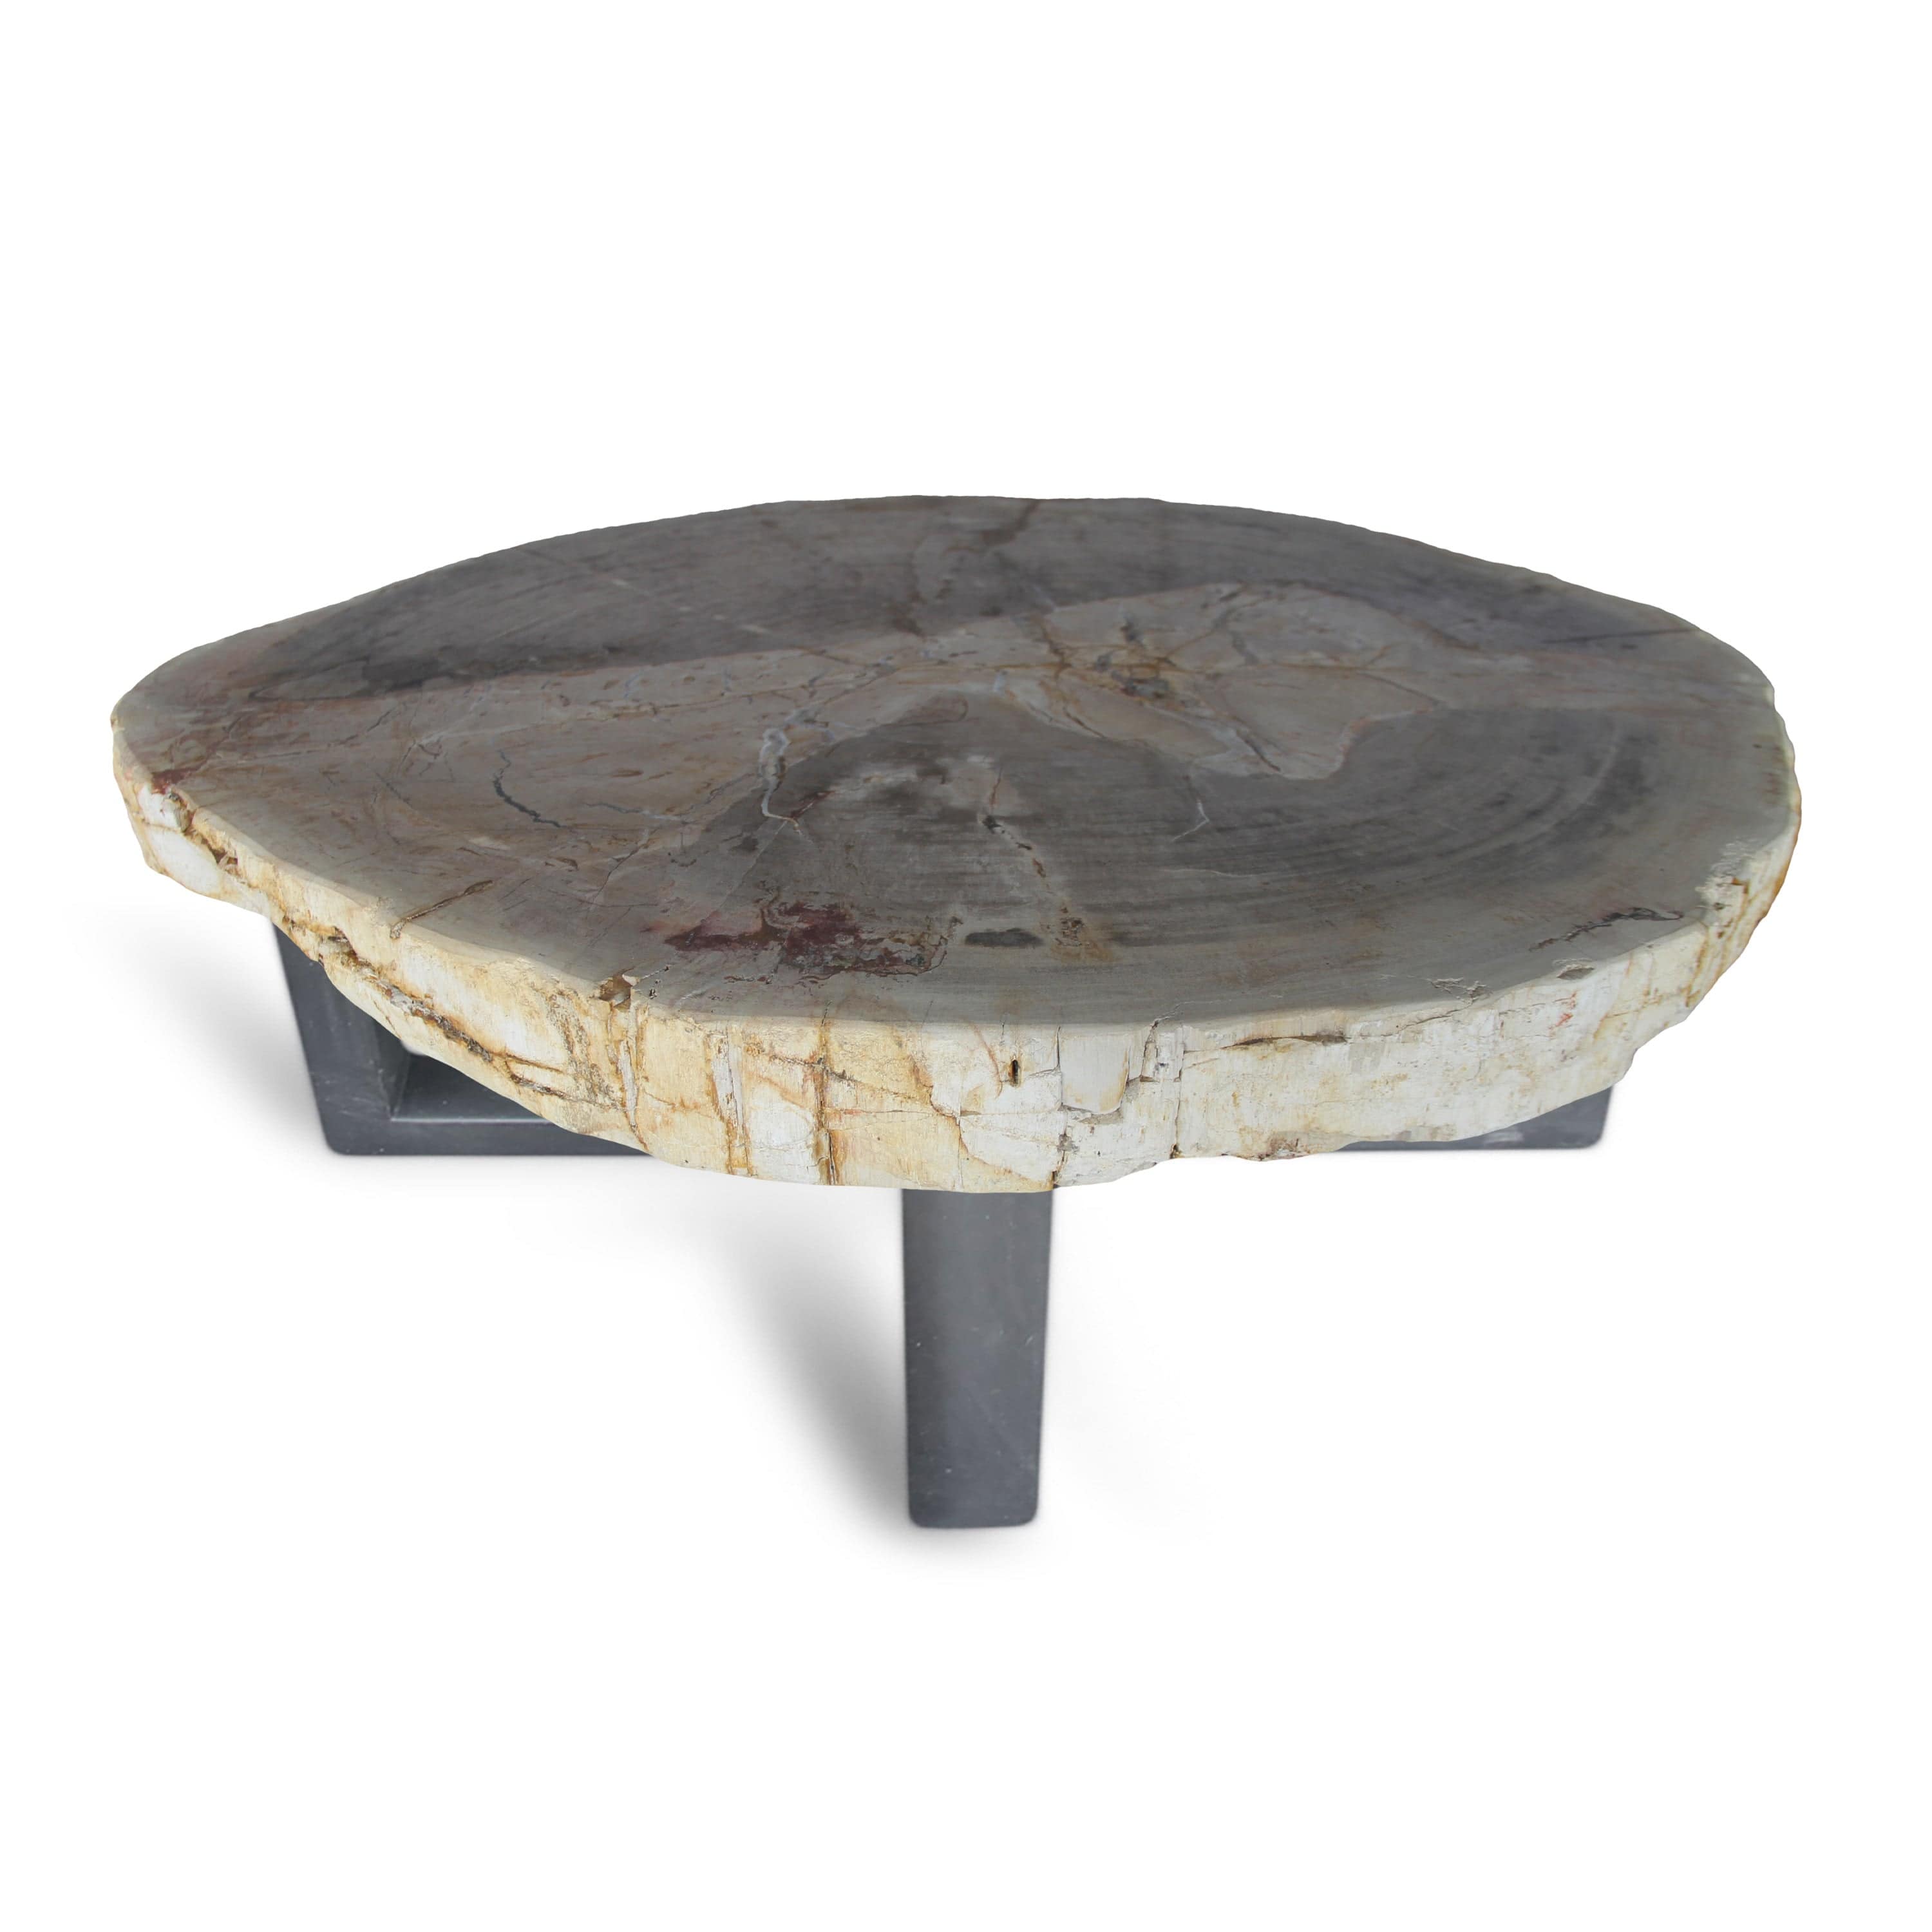 Kalifano Petrified Wood Petrified Wood Round Slab Coffee Table from Indonesia - 34" / 165 lbs PWT6000.004